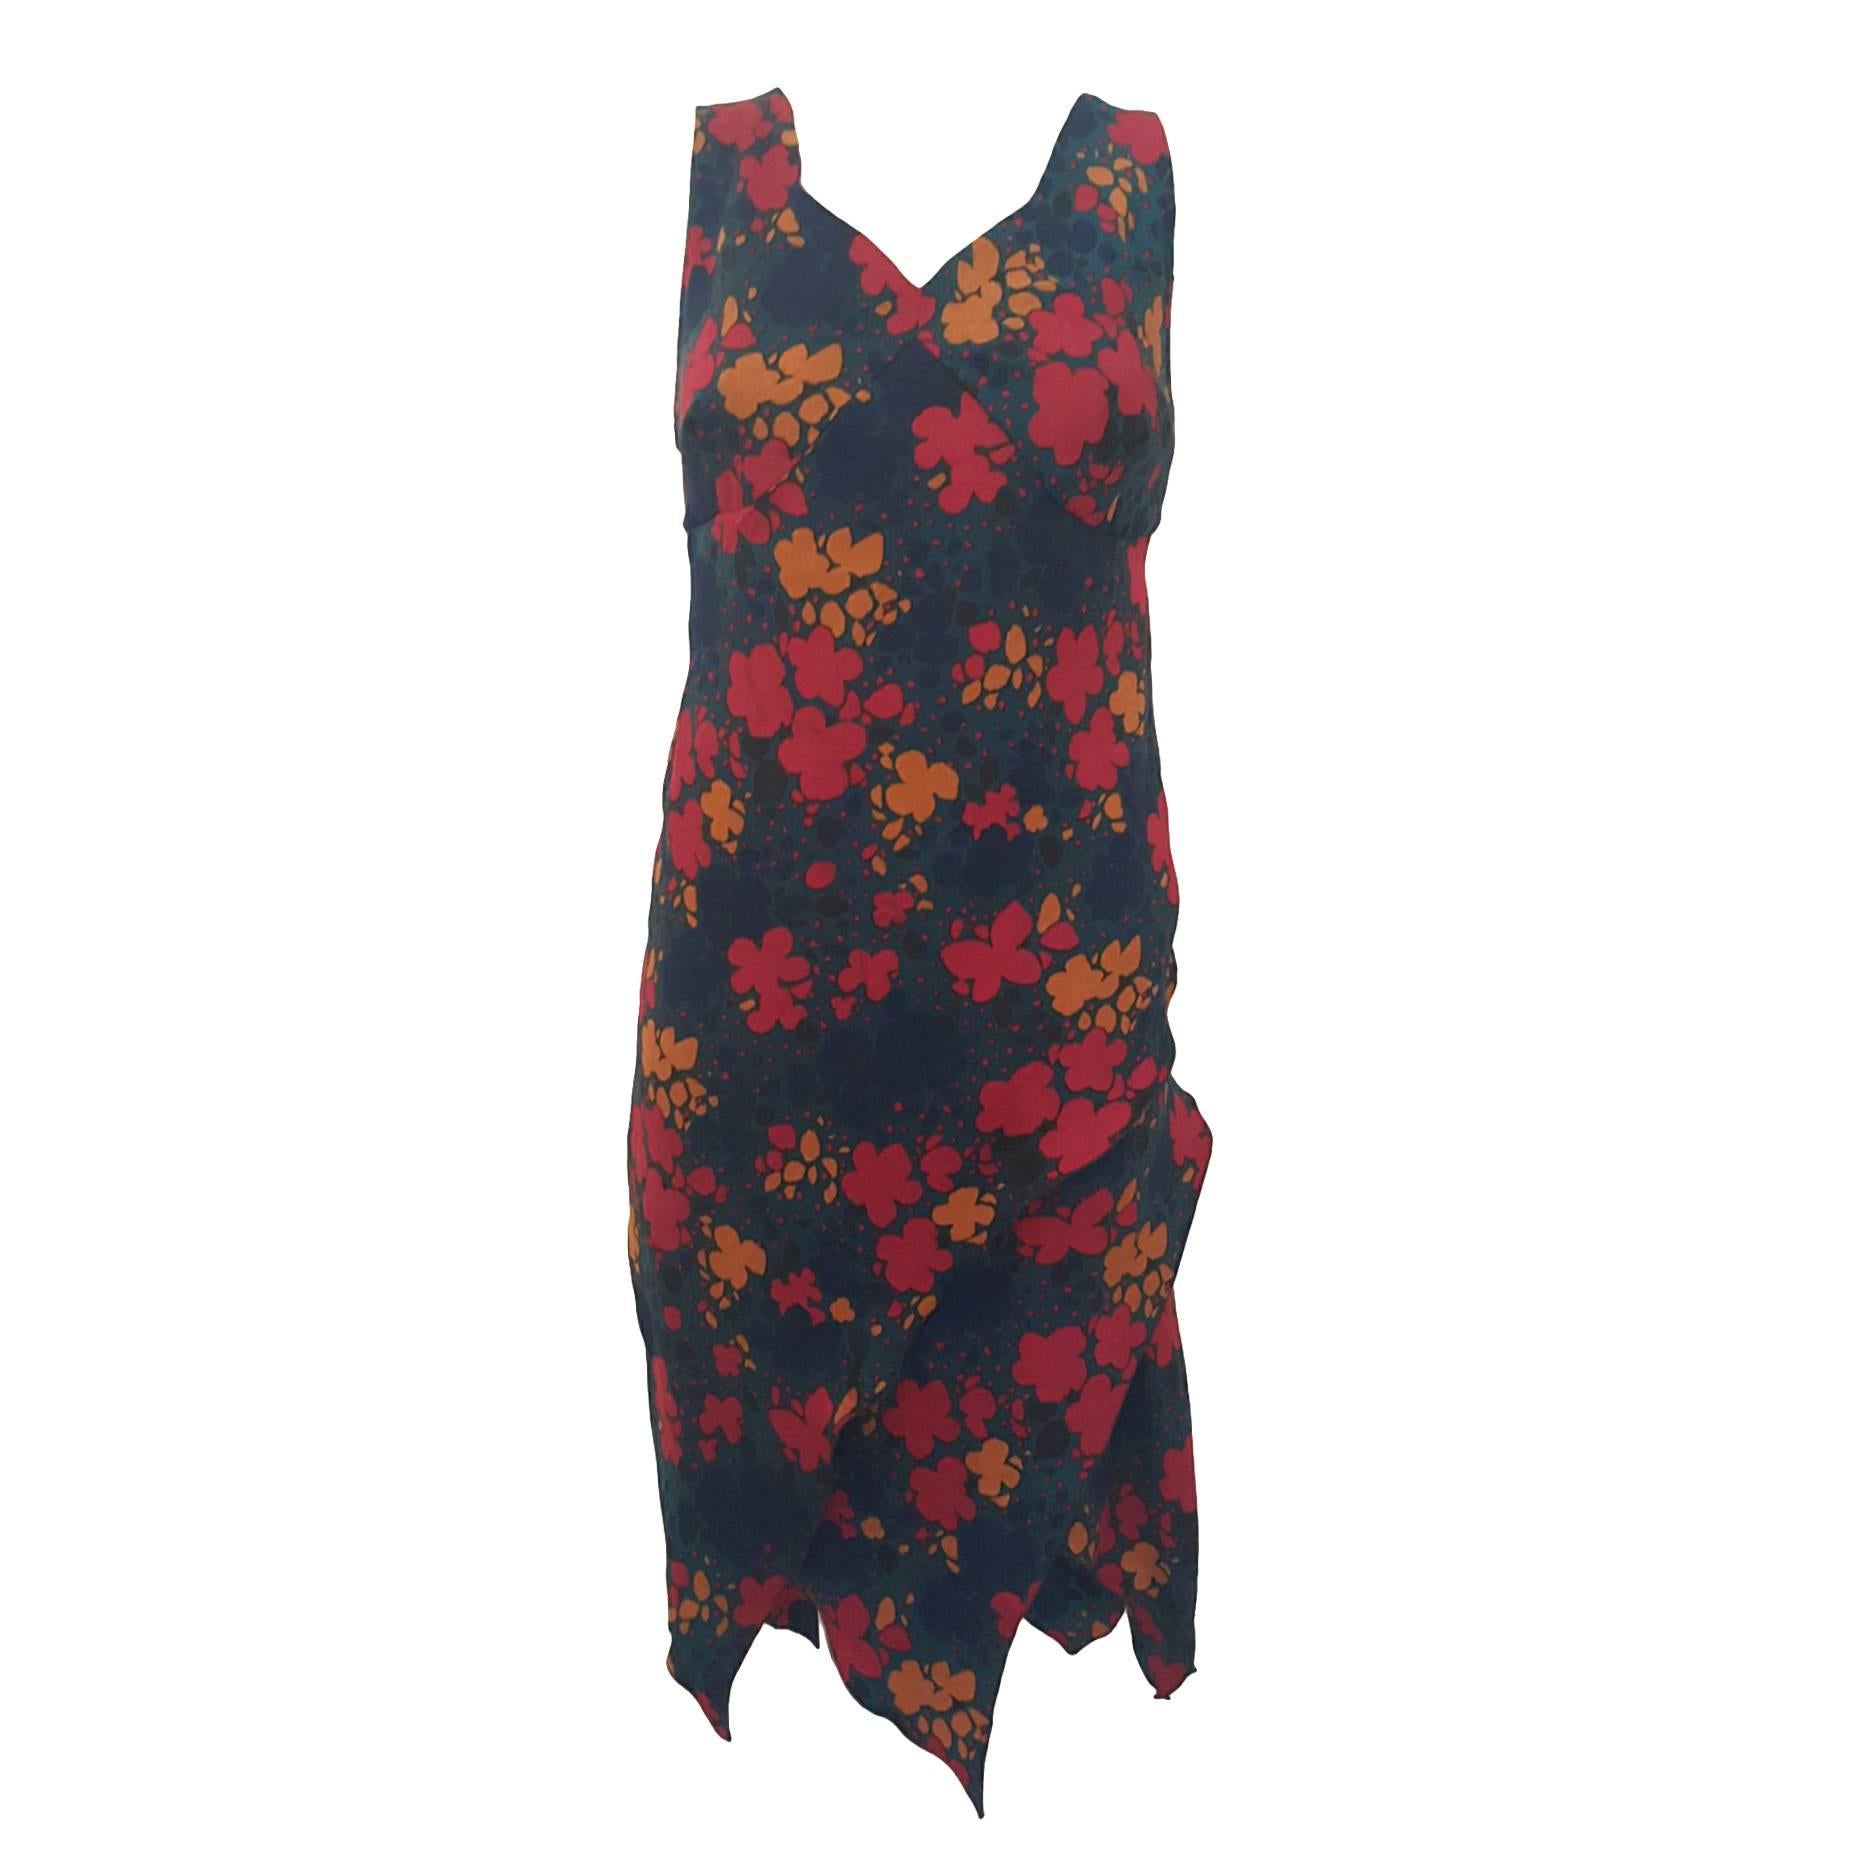 1970s Yves Saint Laurent navy with flowers dress